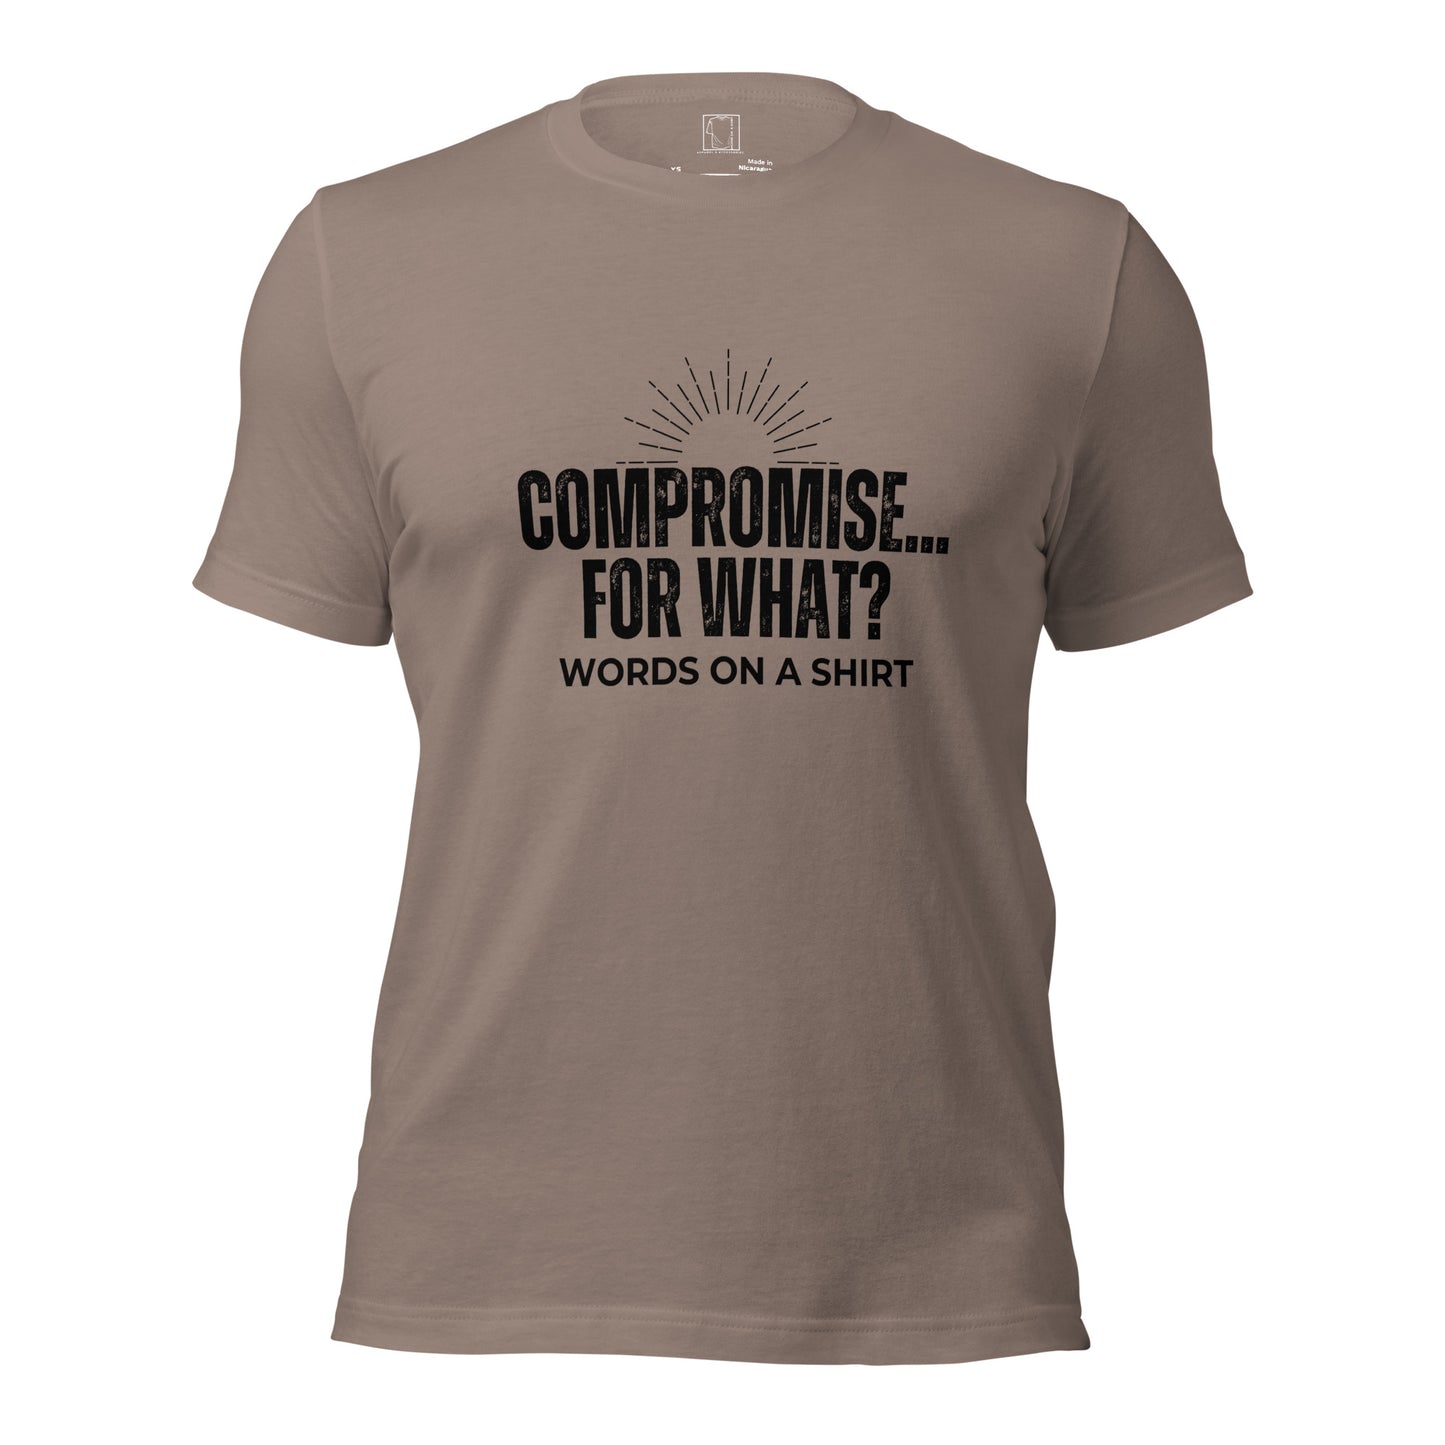 Get ready to rock your style with this killer 100% cotton tee! It's got all the must-haves: pre-shrunk fabric, side-seamed construction, and the perfect fit. Oh, and don't forget our quirky phrase, "Compromise For What."